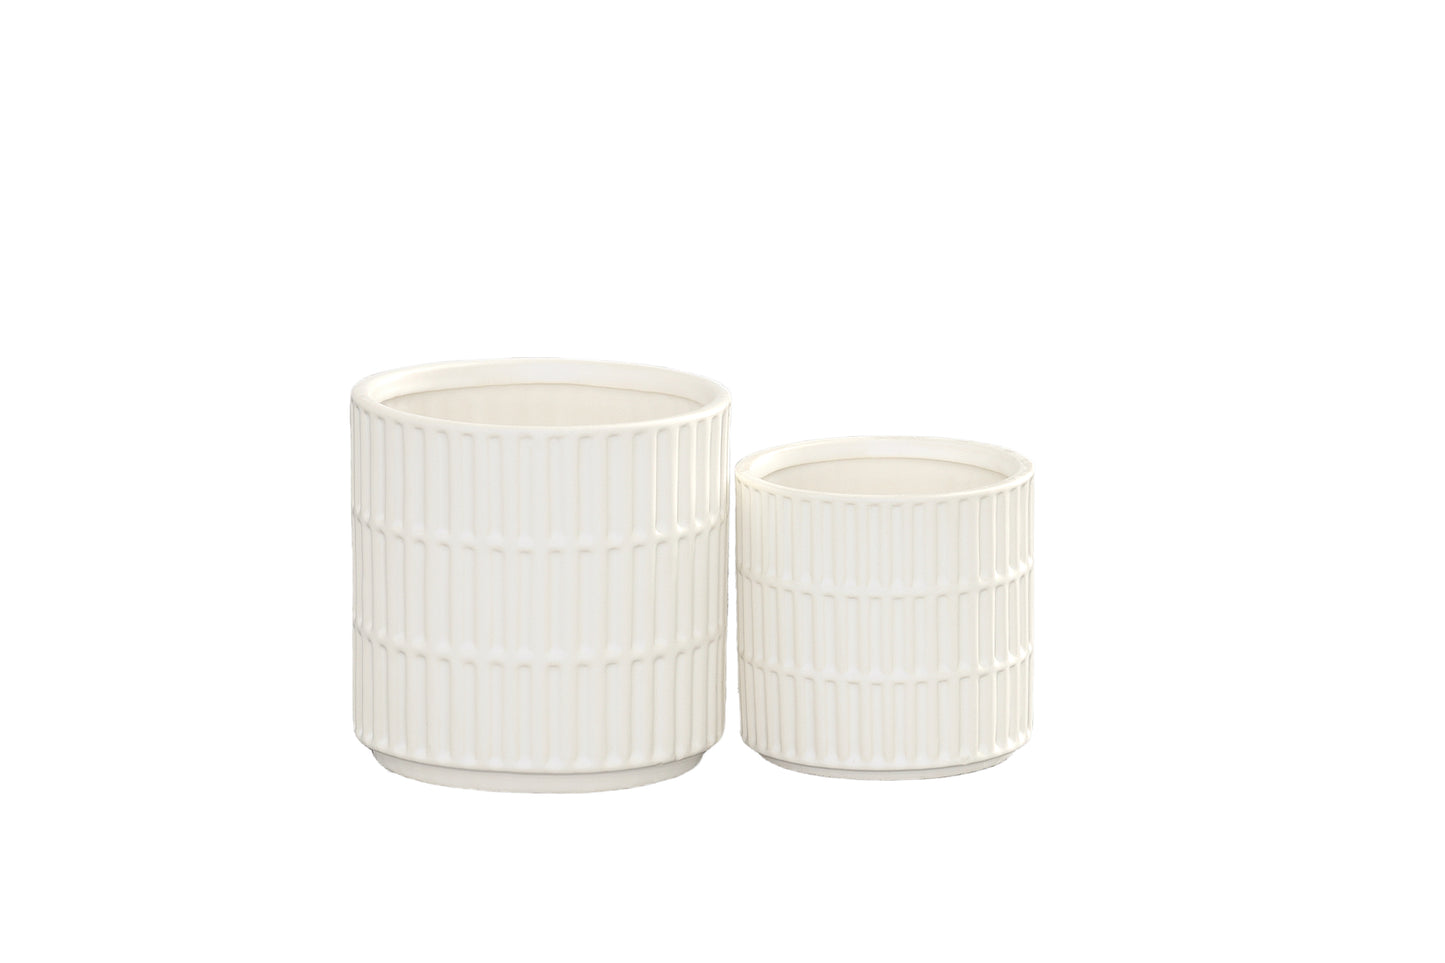 Ceramic Cylindrical Pot with Wide Mouth and Engraved Rectangle Design Body, Set of 2